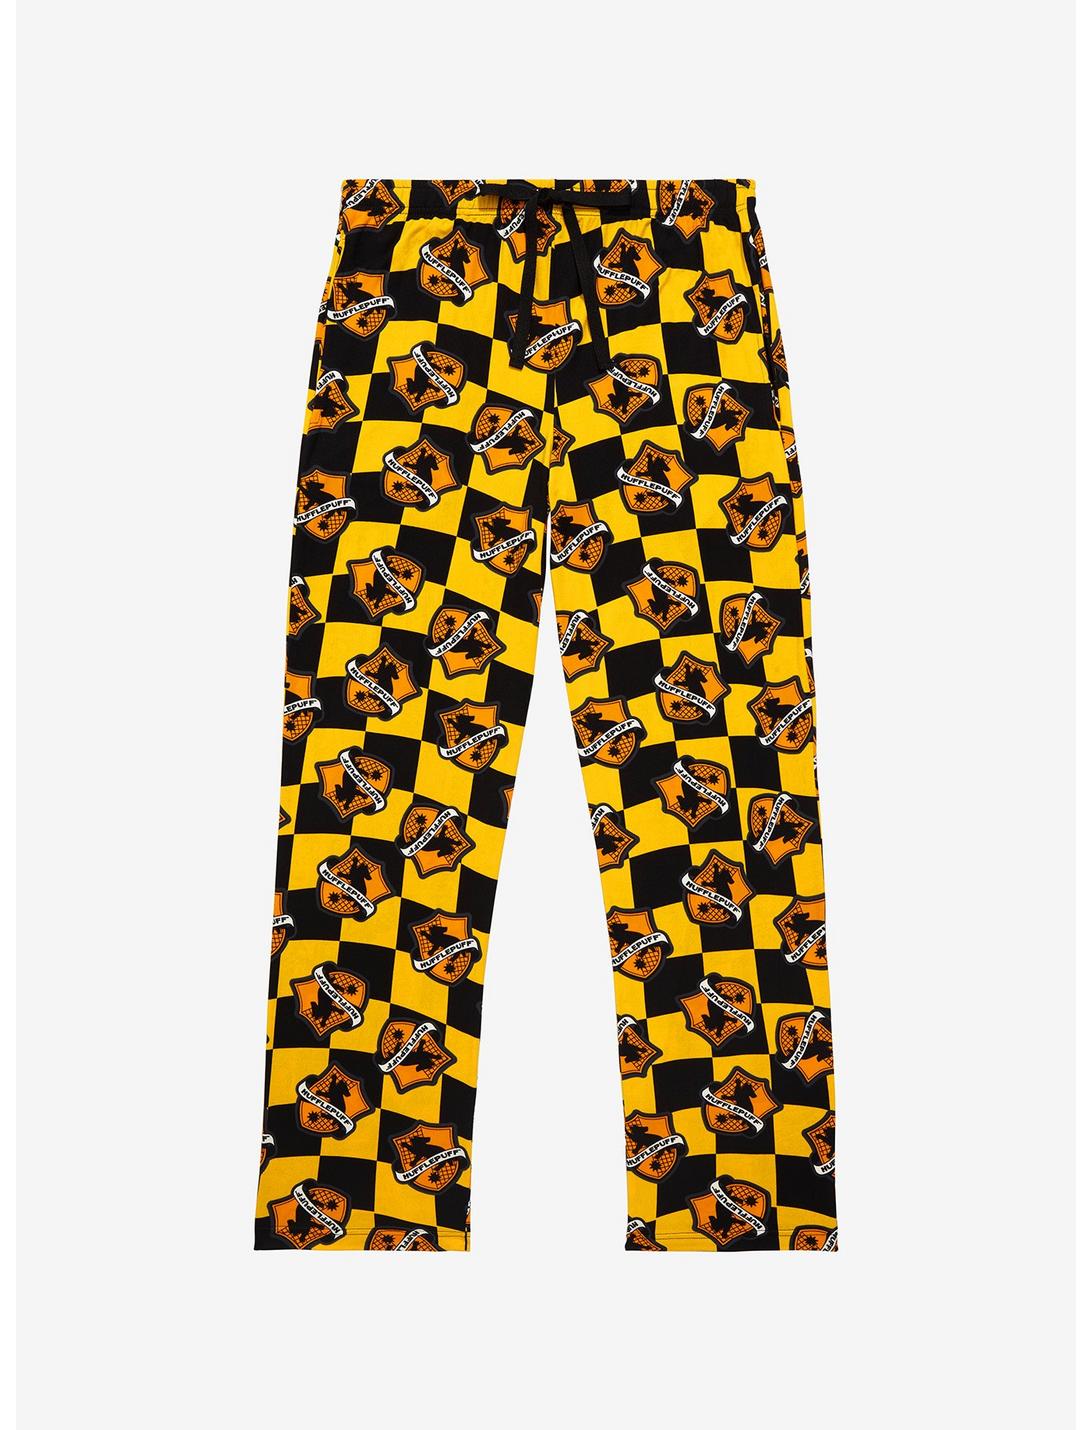 Harry Potter Hufflepuff House Crest Checkered Sleep Pants - BoxLunch Exclusive , MULTI, hi-res